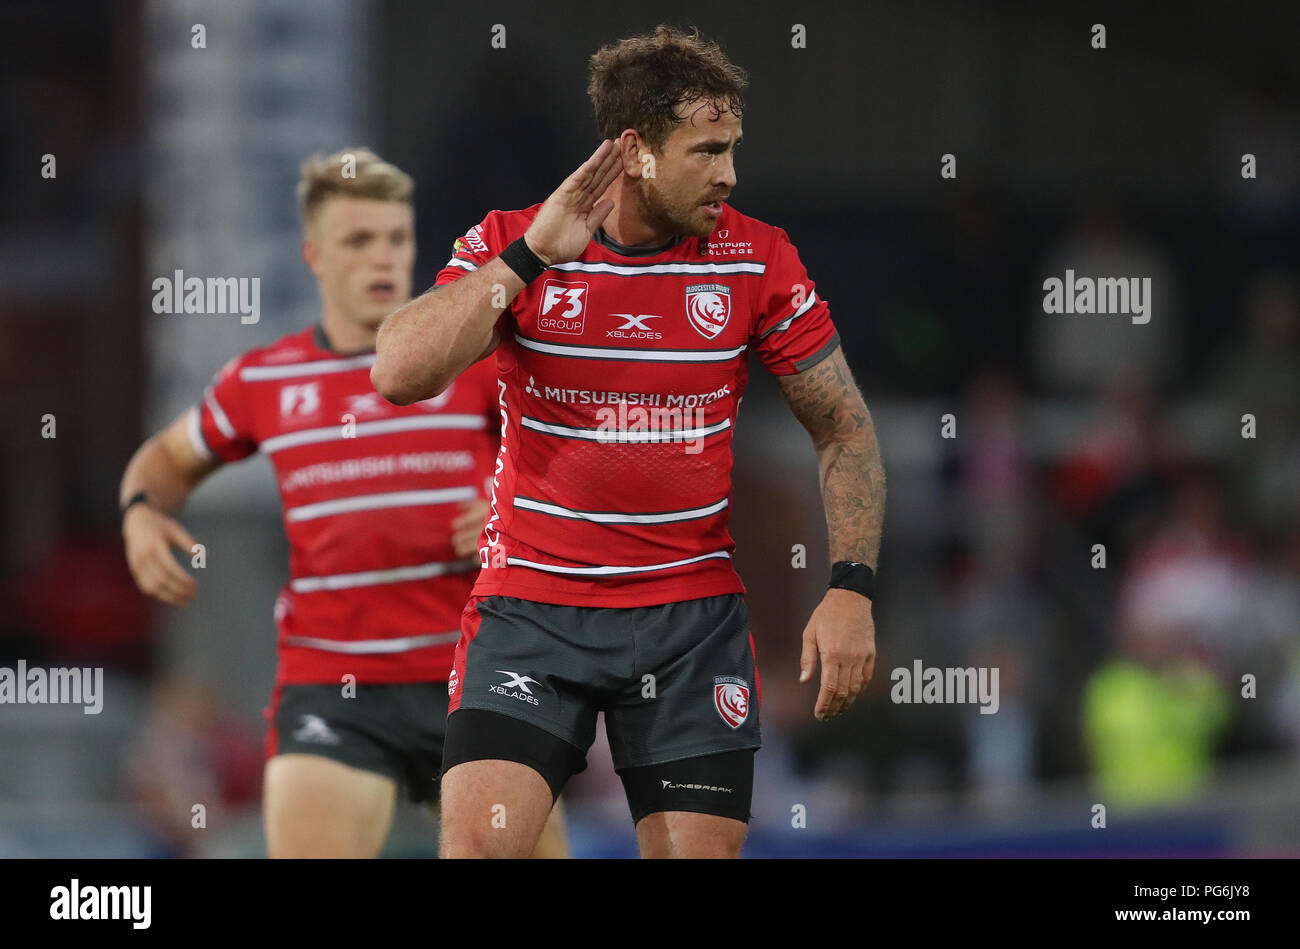 Gloucester's Danny Cipriani during the pre-season friendly match at Kingsholm Stadium, Gloucester. PRESS ASSOCIATION Photo. Picture date: Thursday August 23, 2018. See PA story RugbyU Gloucester. Photo credit should read: David Davies/PA Wire. RESTRICTIONS: Editorial use only. No commercial use. Stock Photo